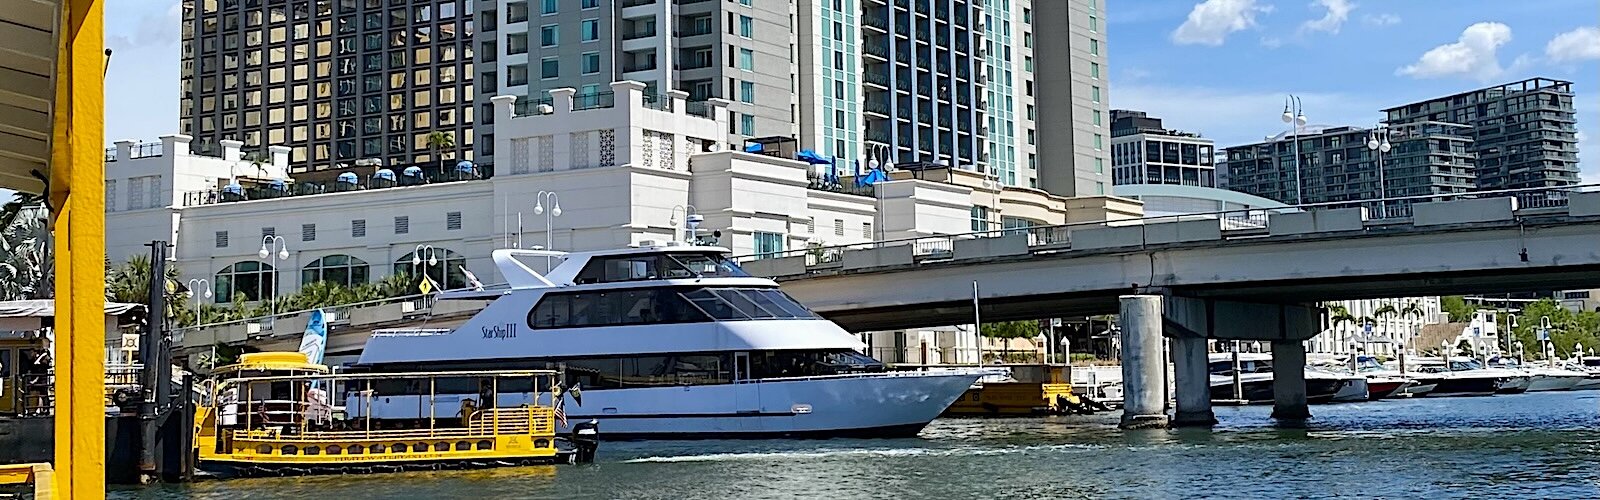 Pirate Water Taxi and Starship III dock near the Convention Center on the Tampa Riverwalk.